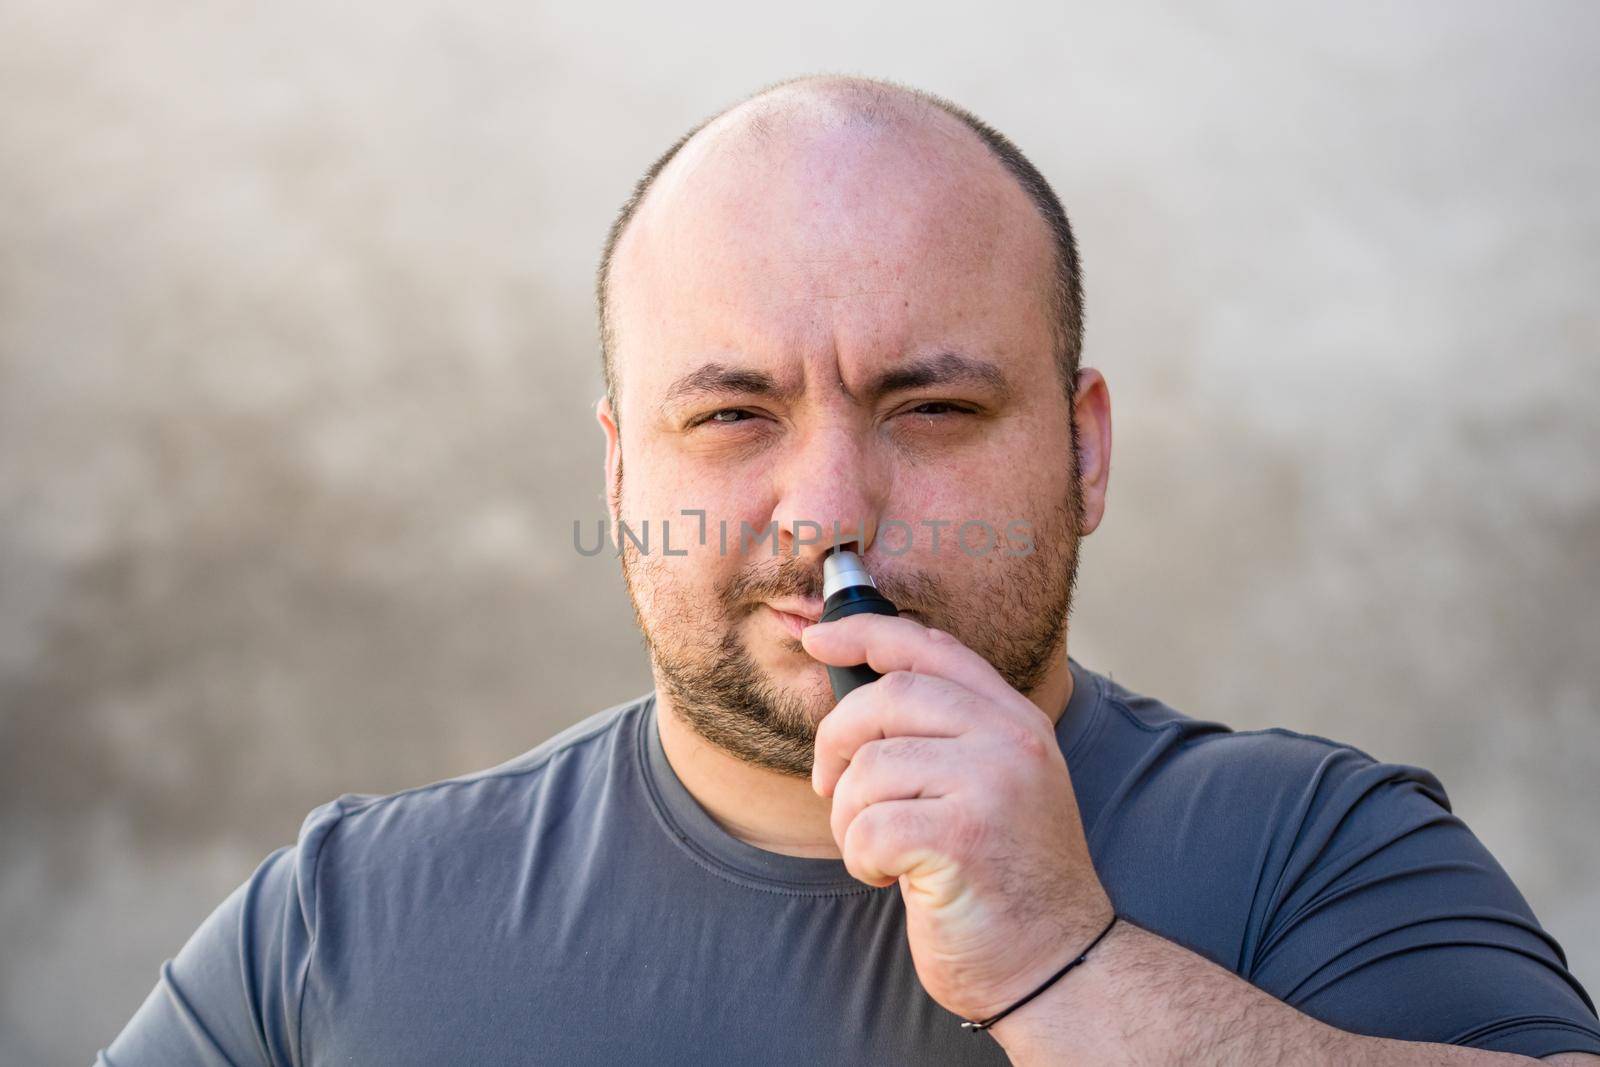 Male shaving ortrimming his nose hair using a hair clipper or electric razor by vladispas